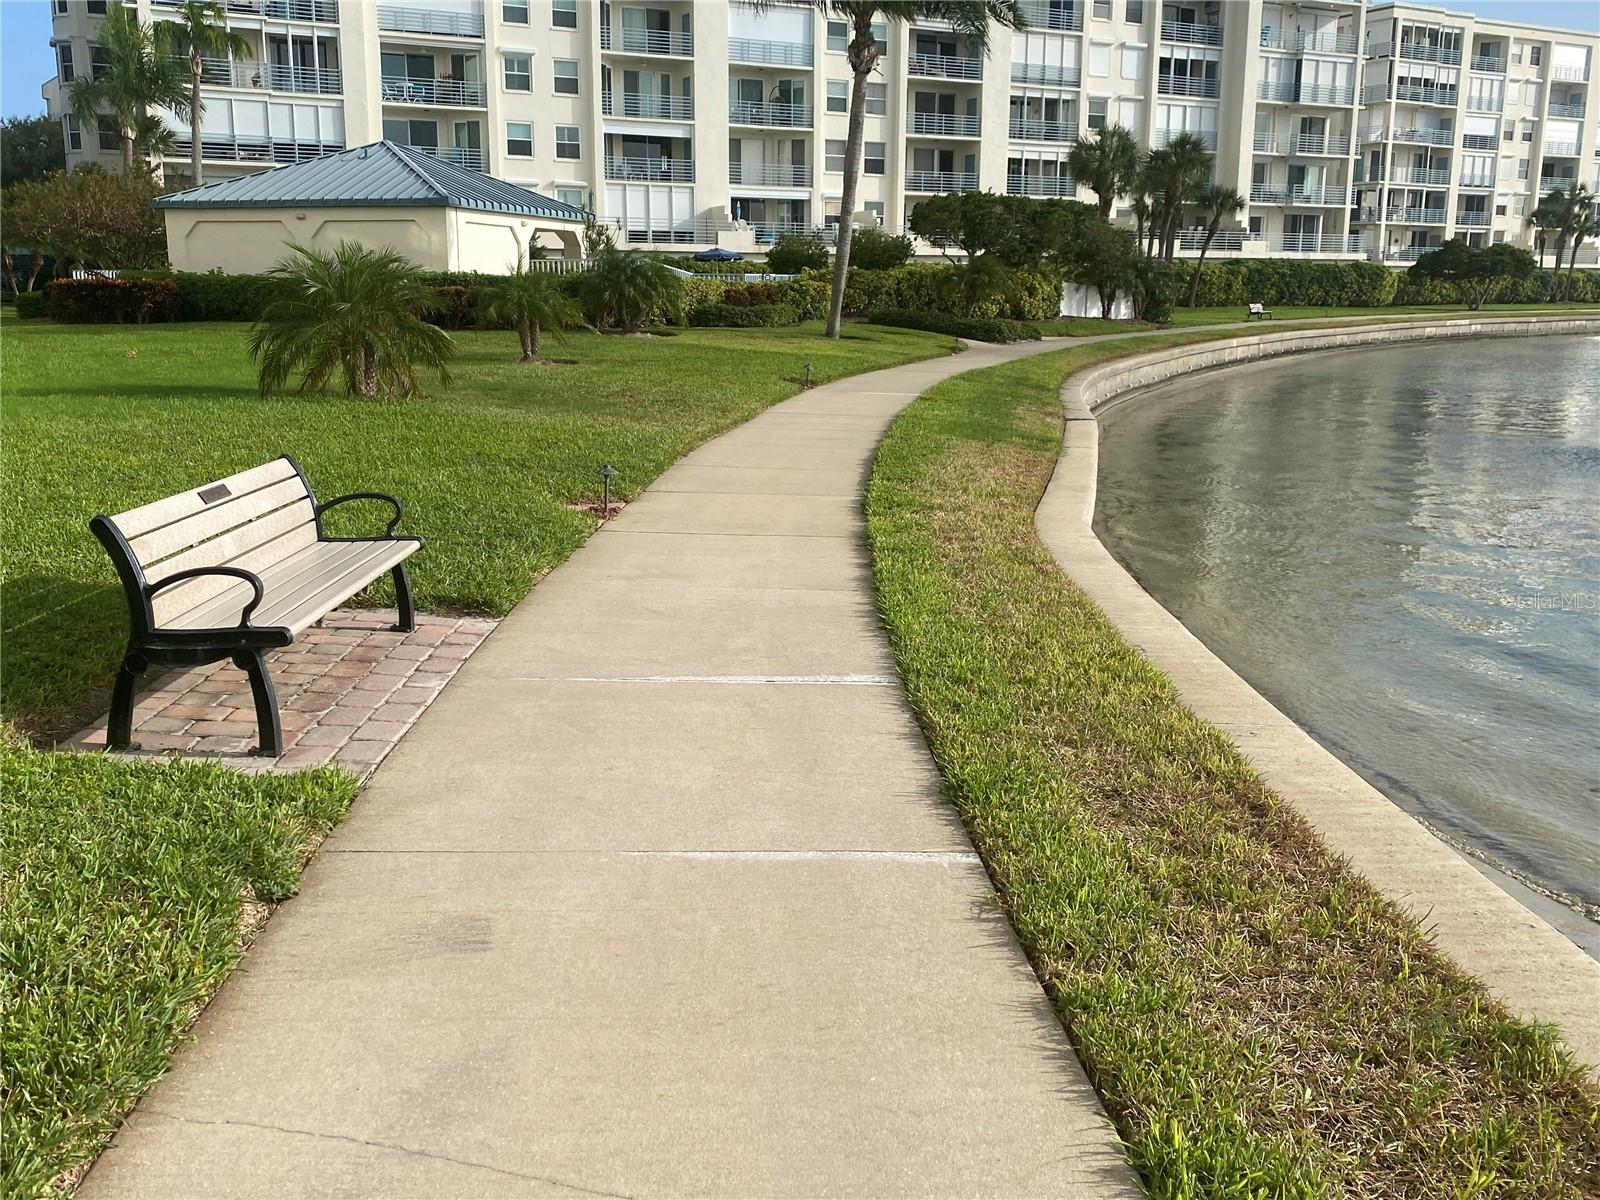 This is part of the 1.5 mile walkway that goes around the Harbourside community